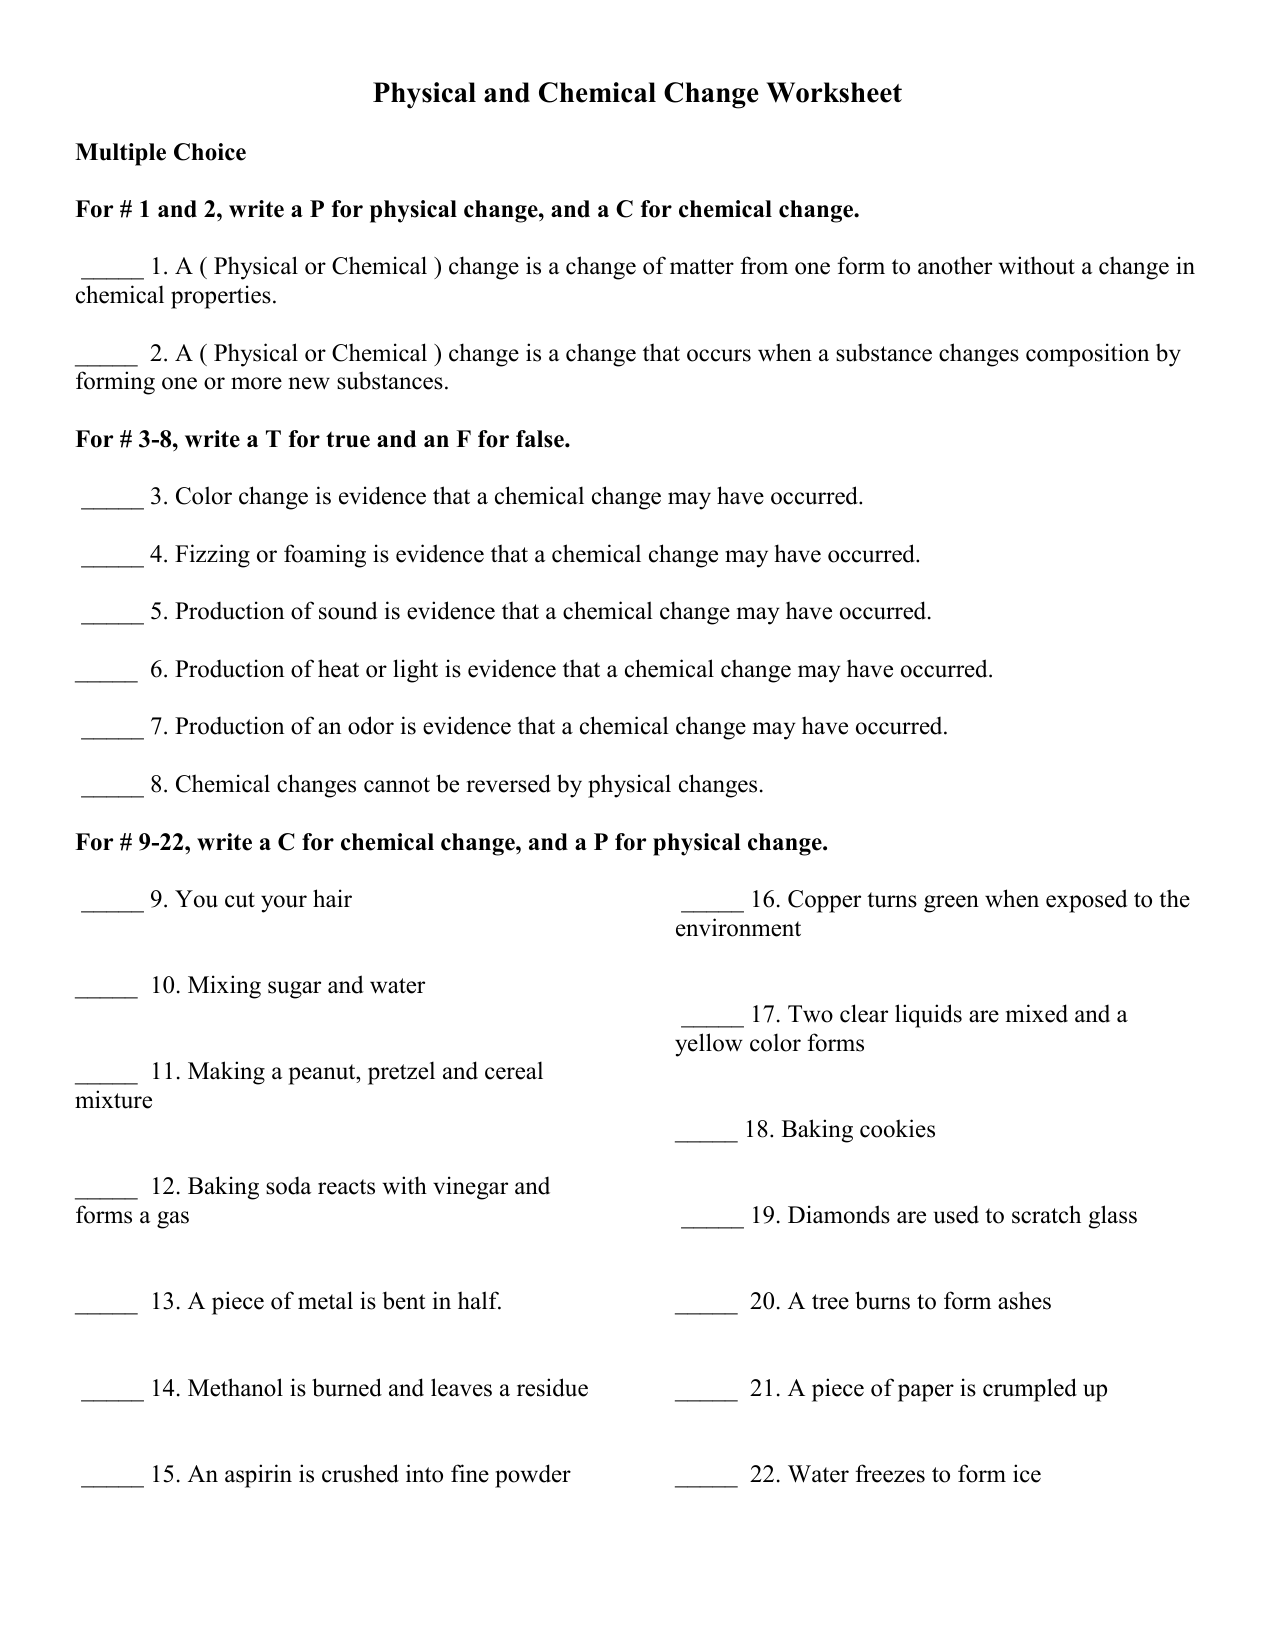 Physical and Chemical Change Worksheet for HW CP Intended For Physical And Chemical Change Worksheet